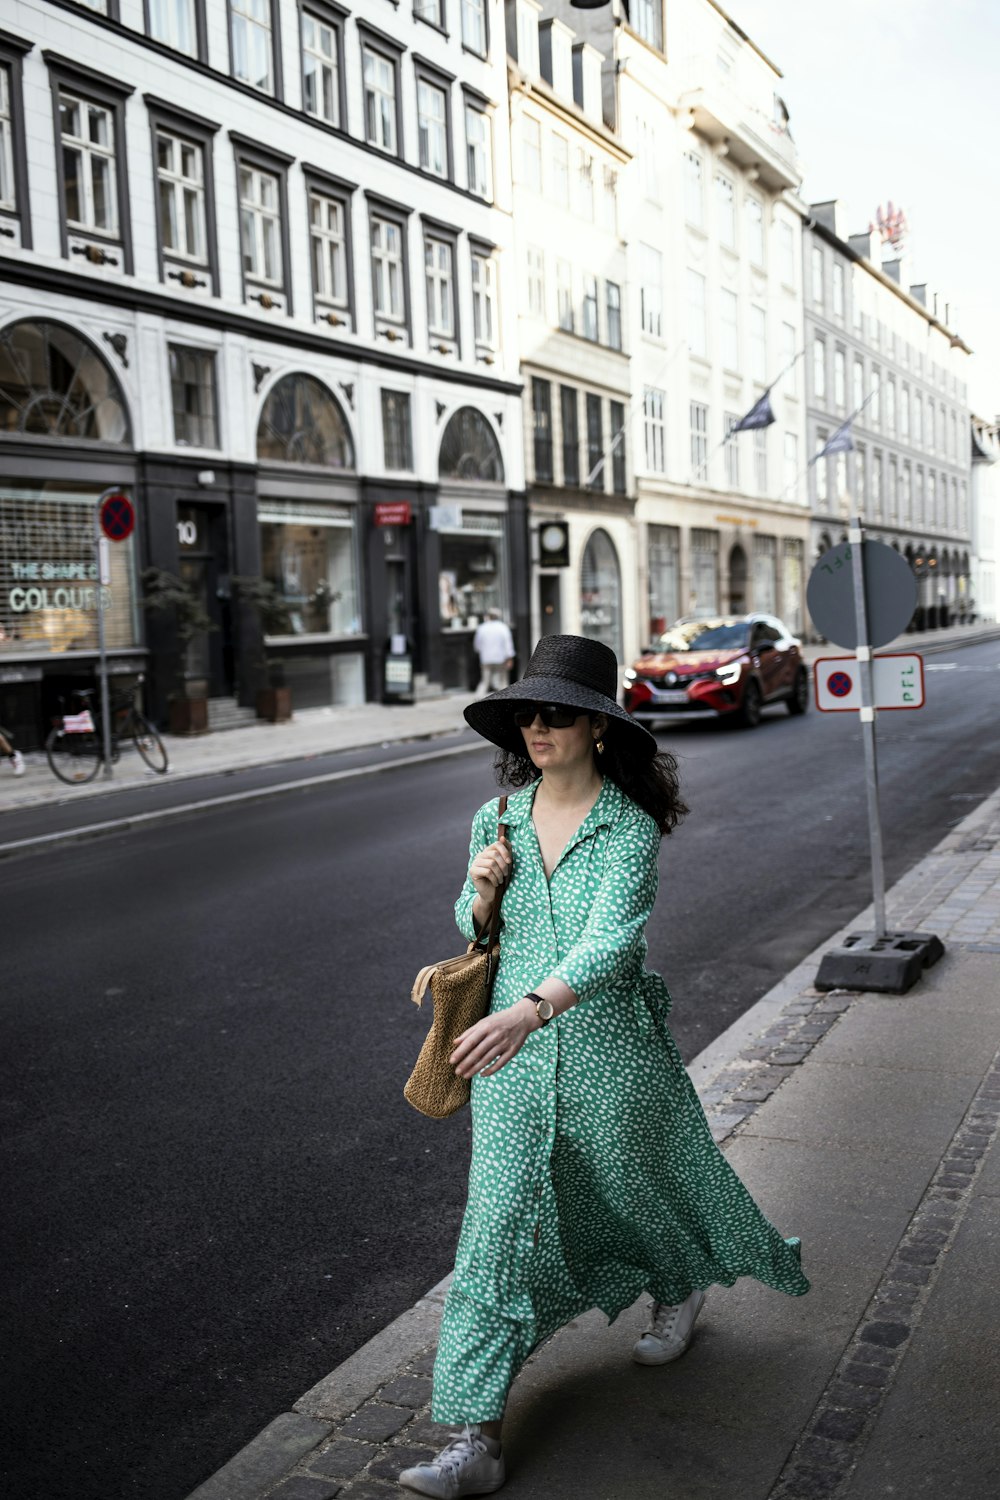 a woman in a green dress and hat walking down a street